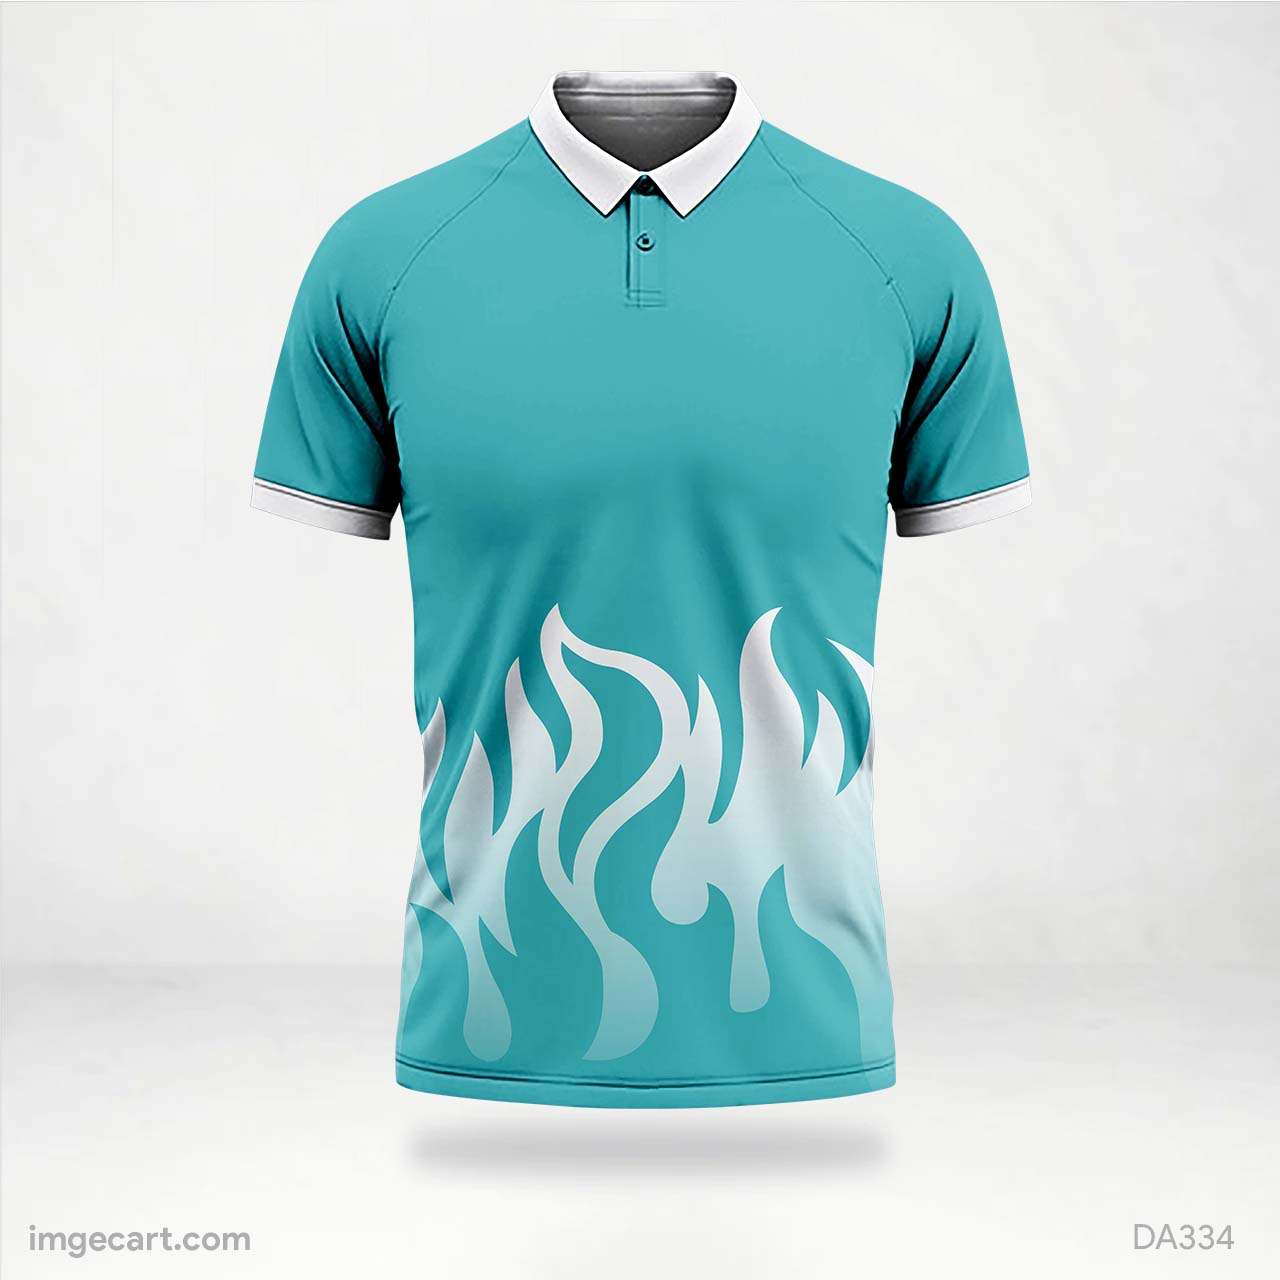 Volleyball Jersey Design Green with white - imgecart